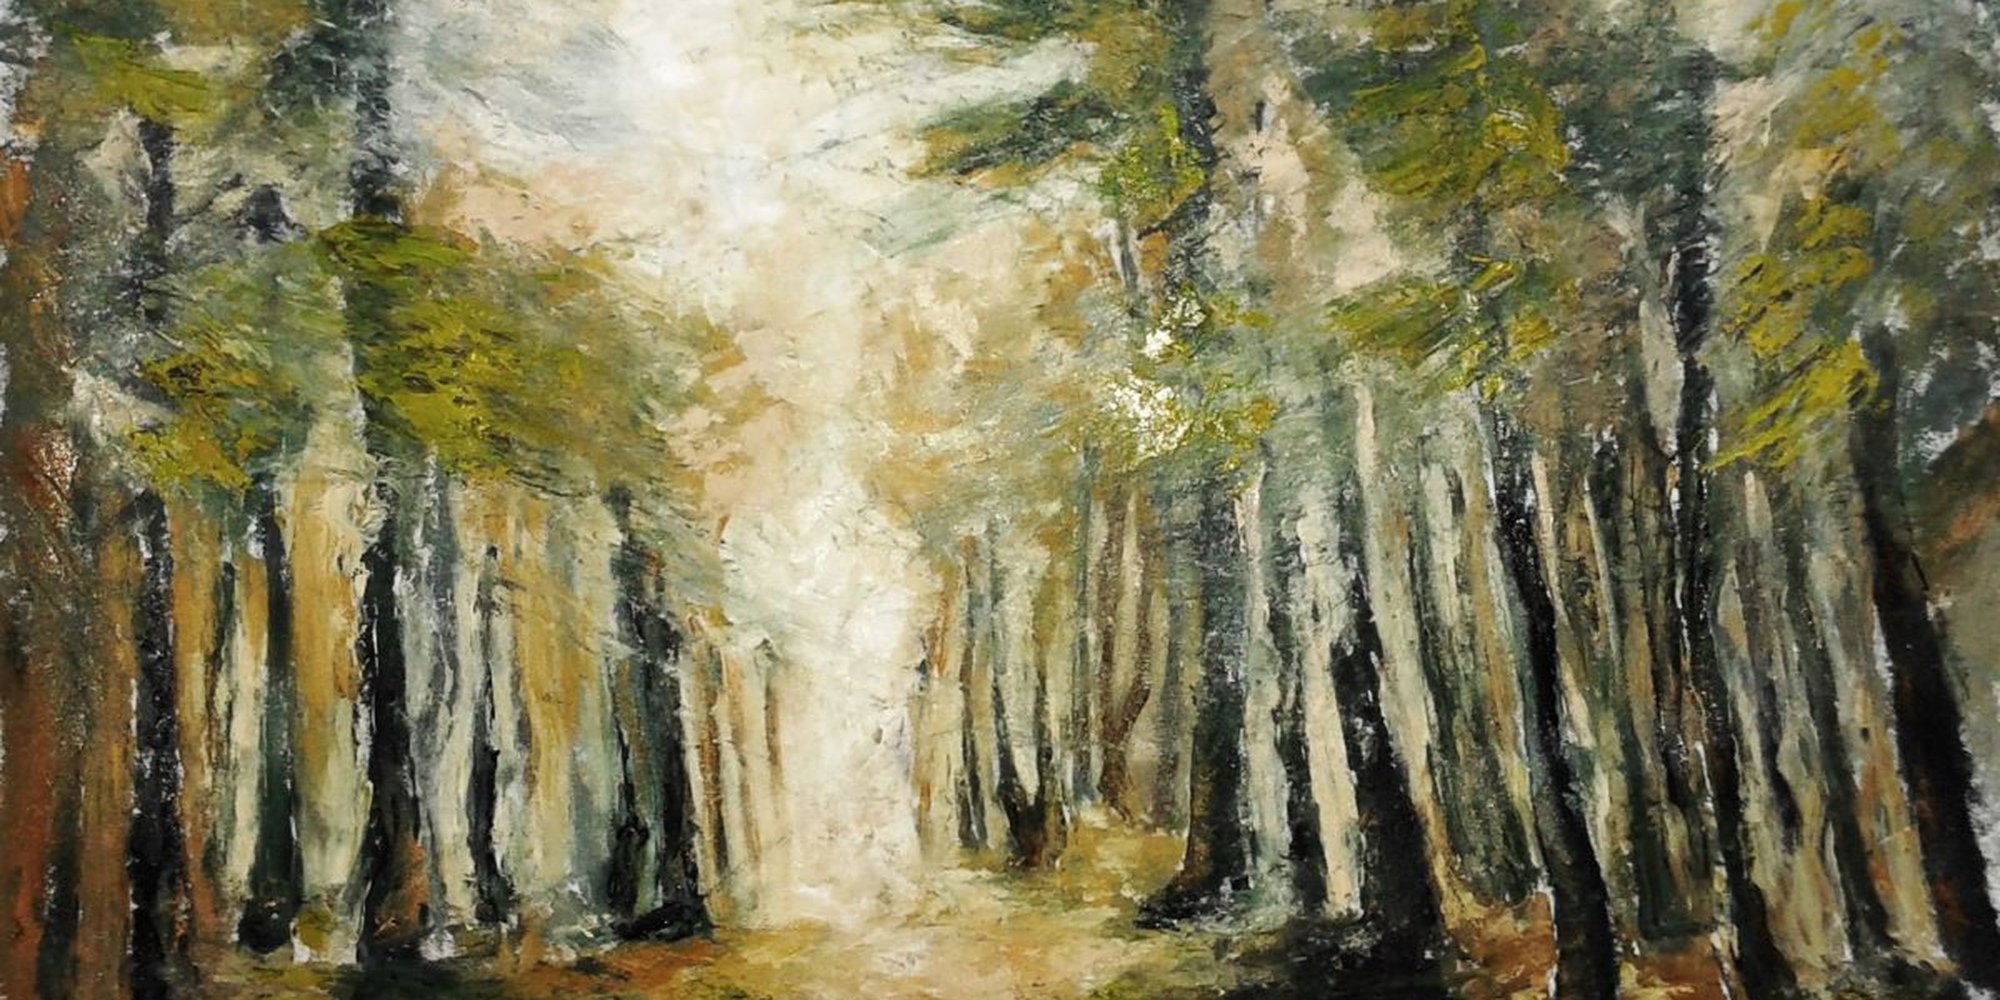 Art of the Day: "Forest Song, pine trees forest path oil landscape painting, 2015" by Emilia Milcheva